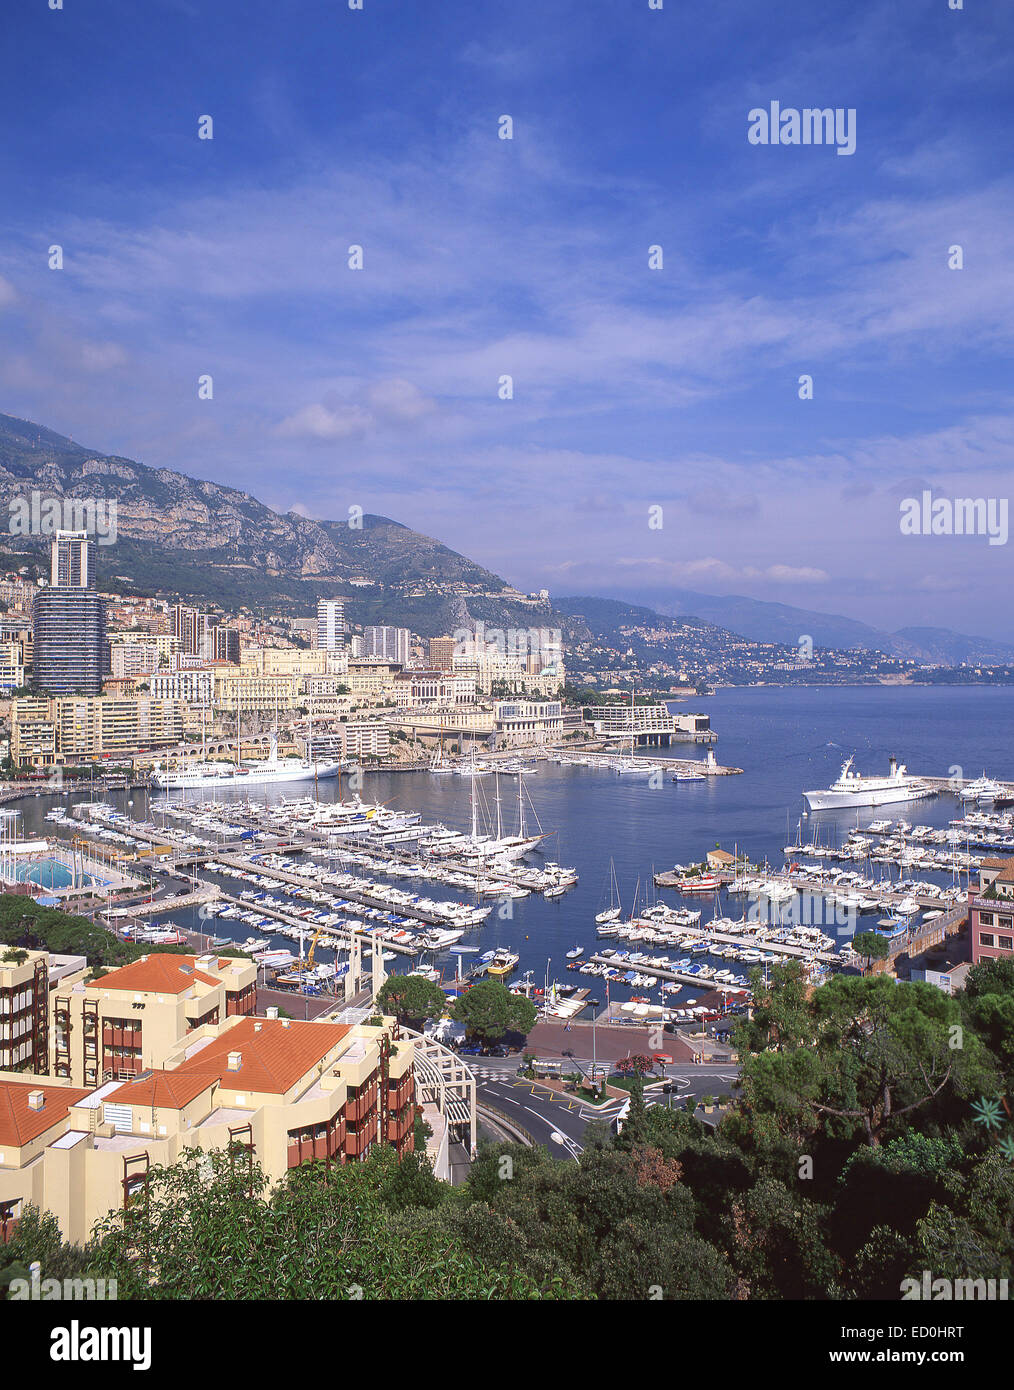 View of harbour and Monte Carlo from La Colle lookout, Principality of Monaco Stock Photo